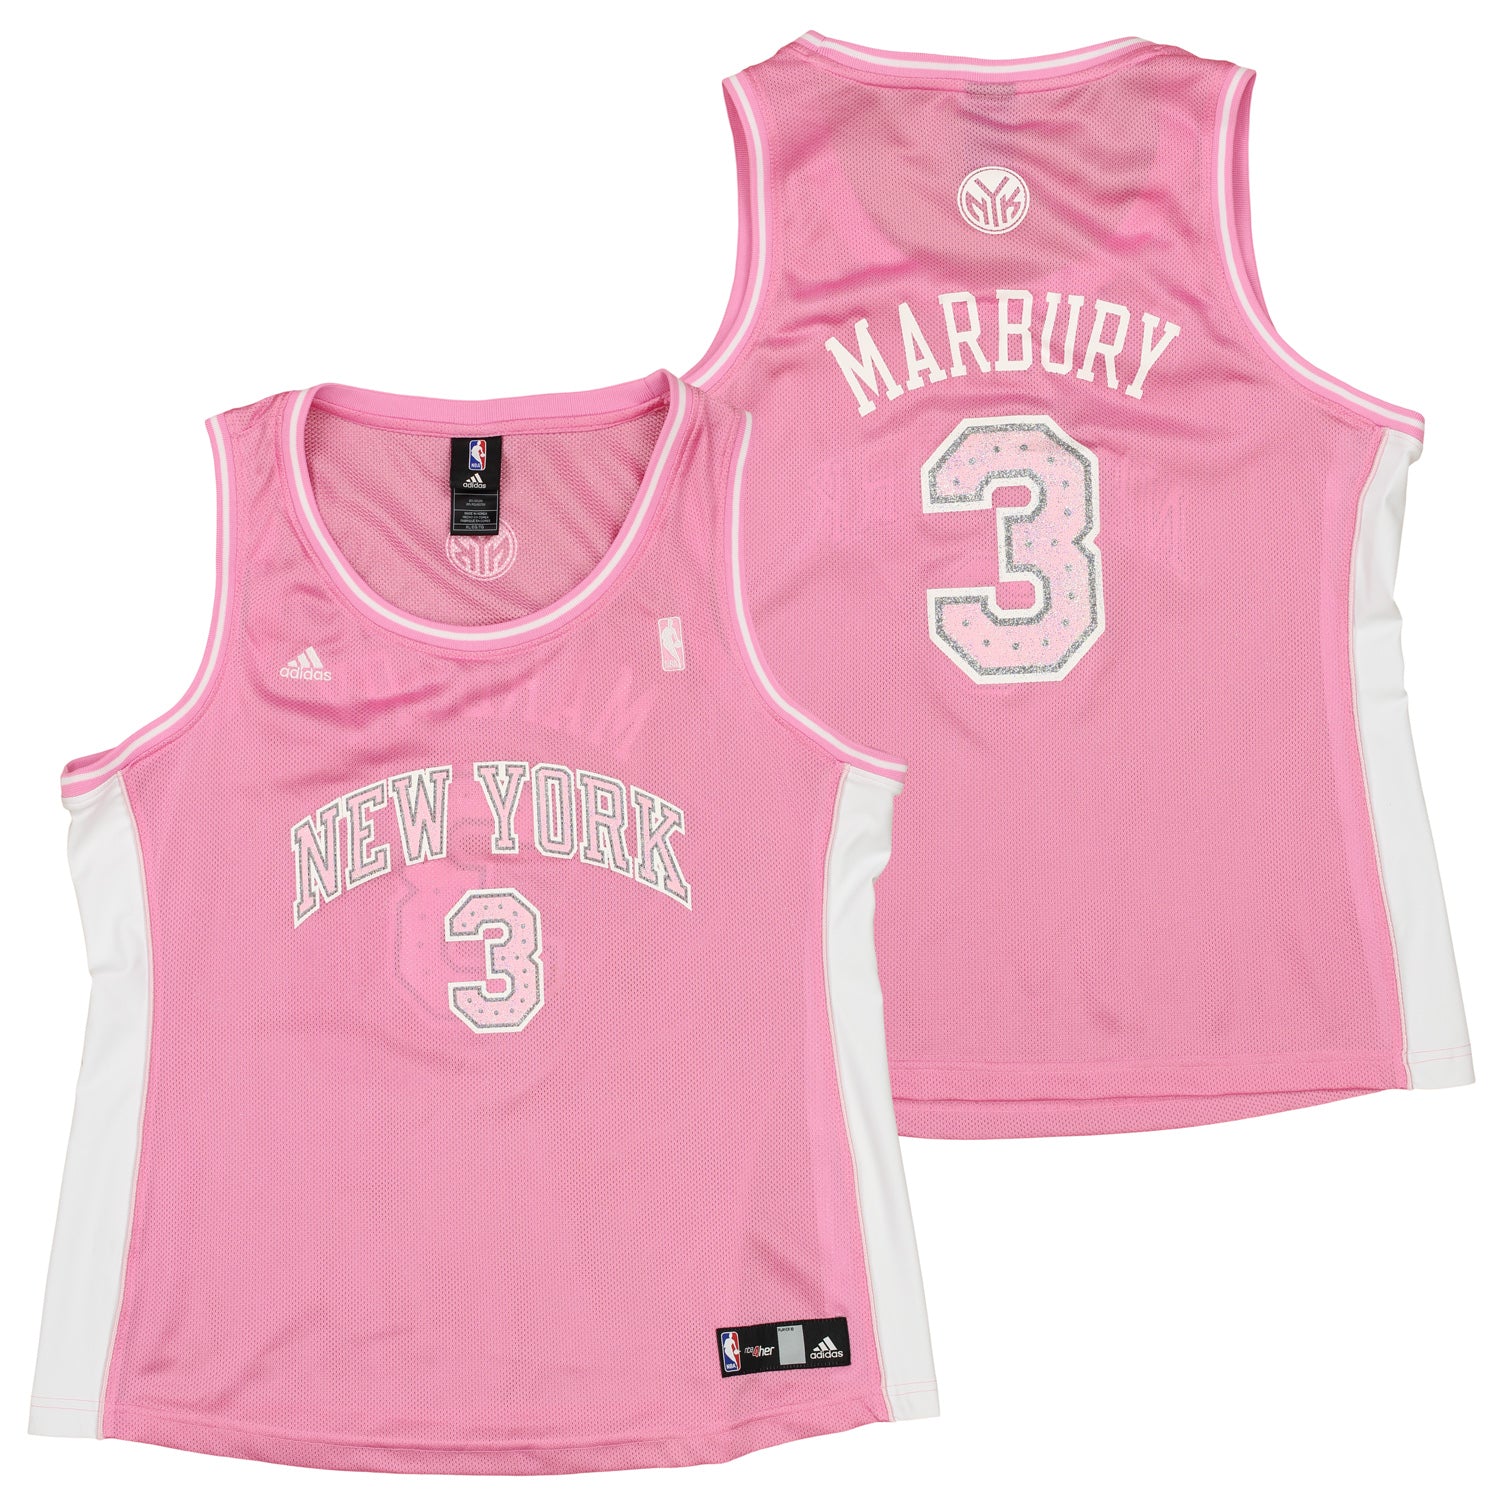 new york nba jersey is fake,